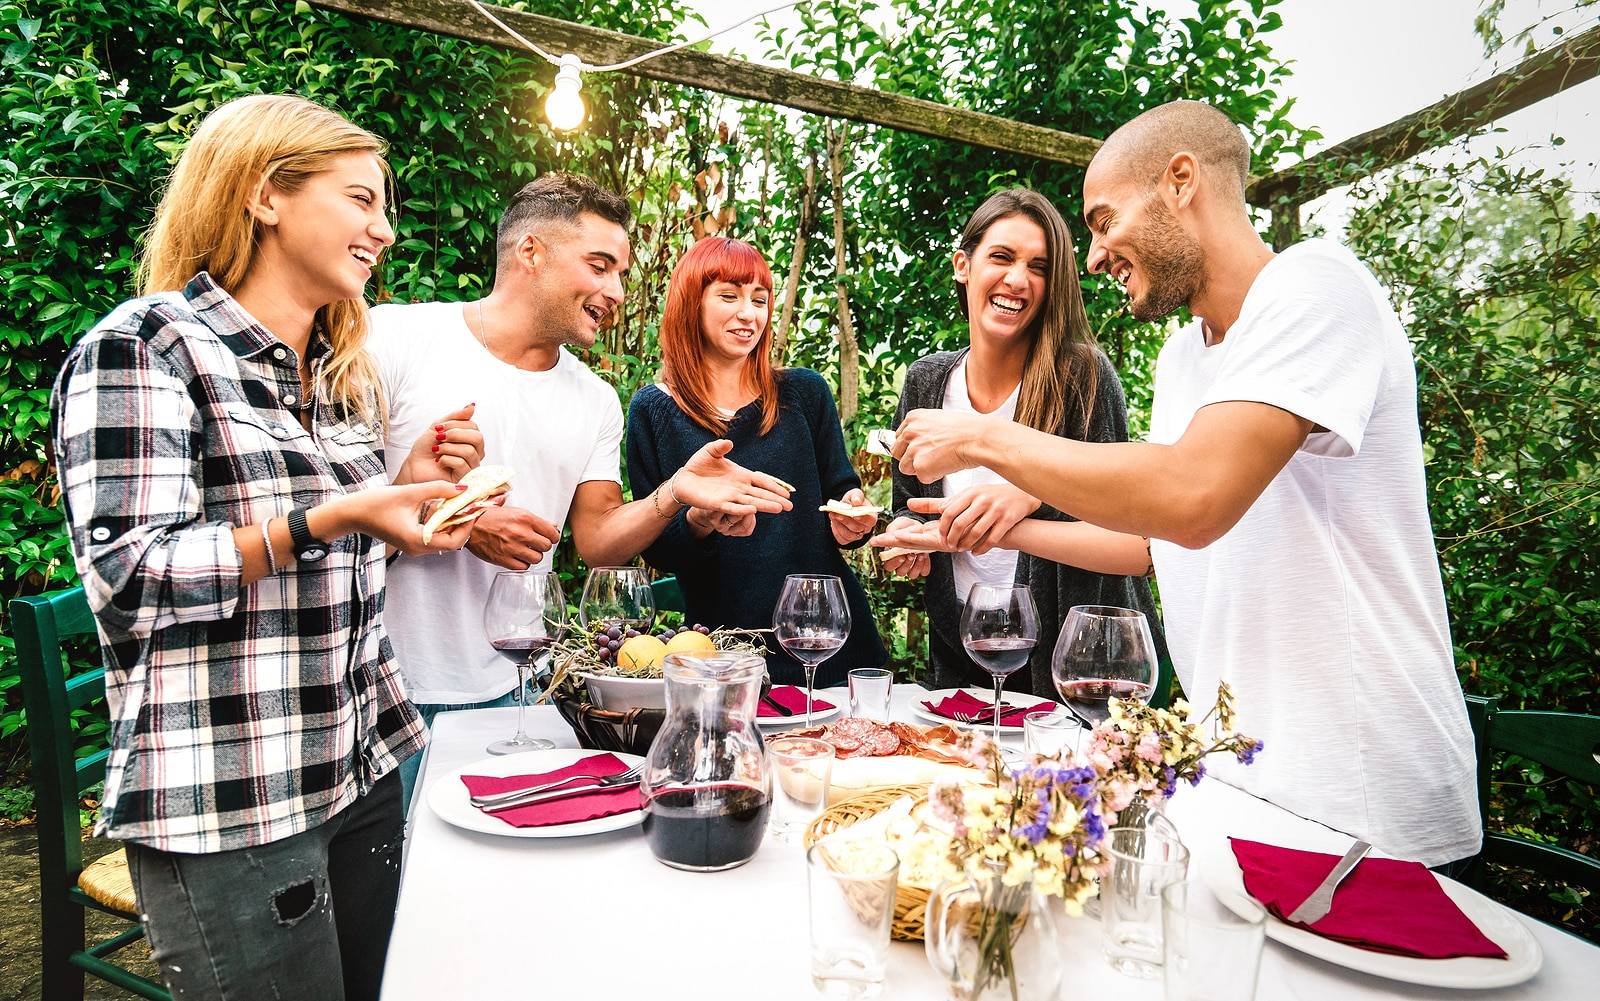 How To Throw the Perfect Garden Backyard Party